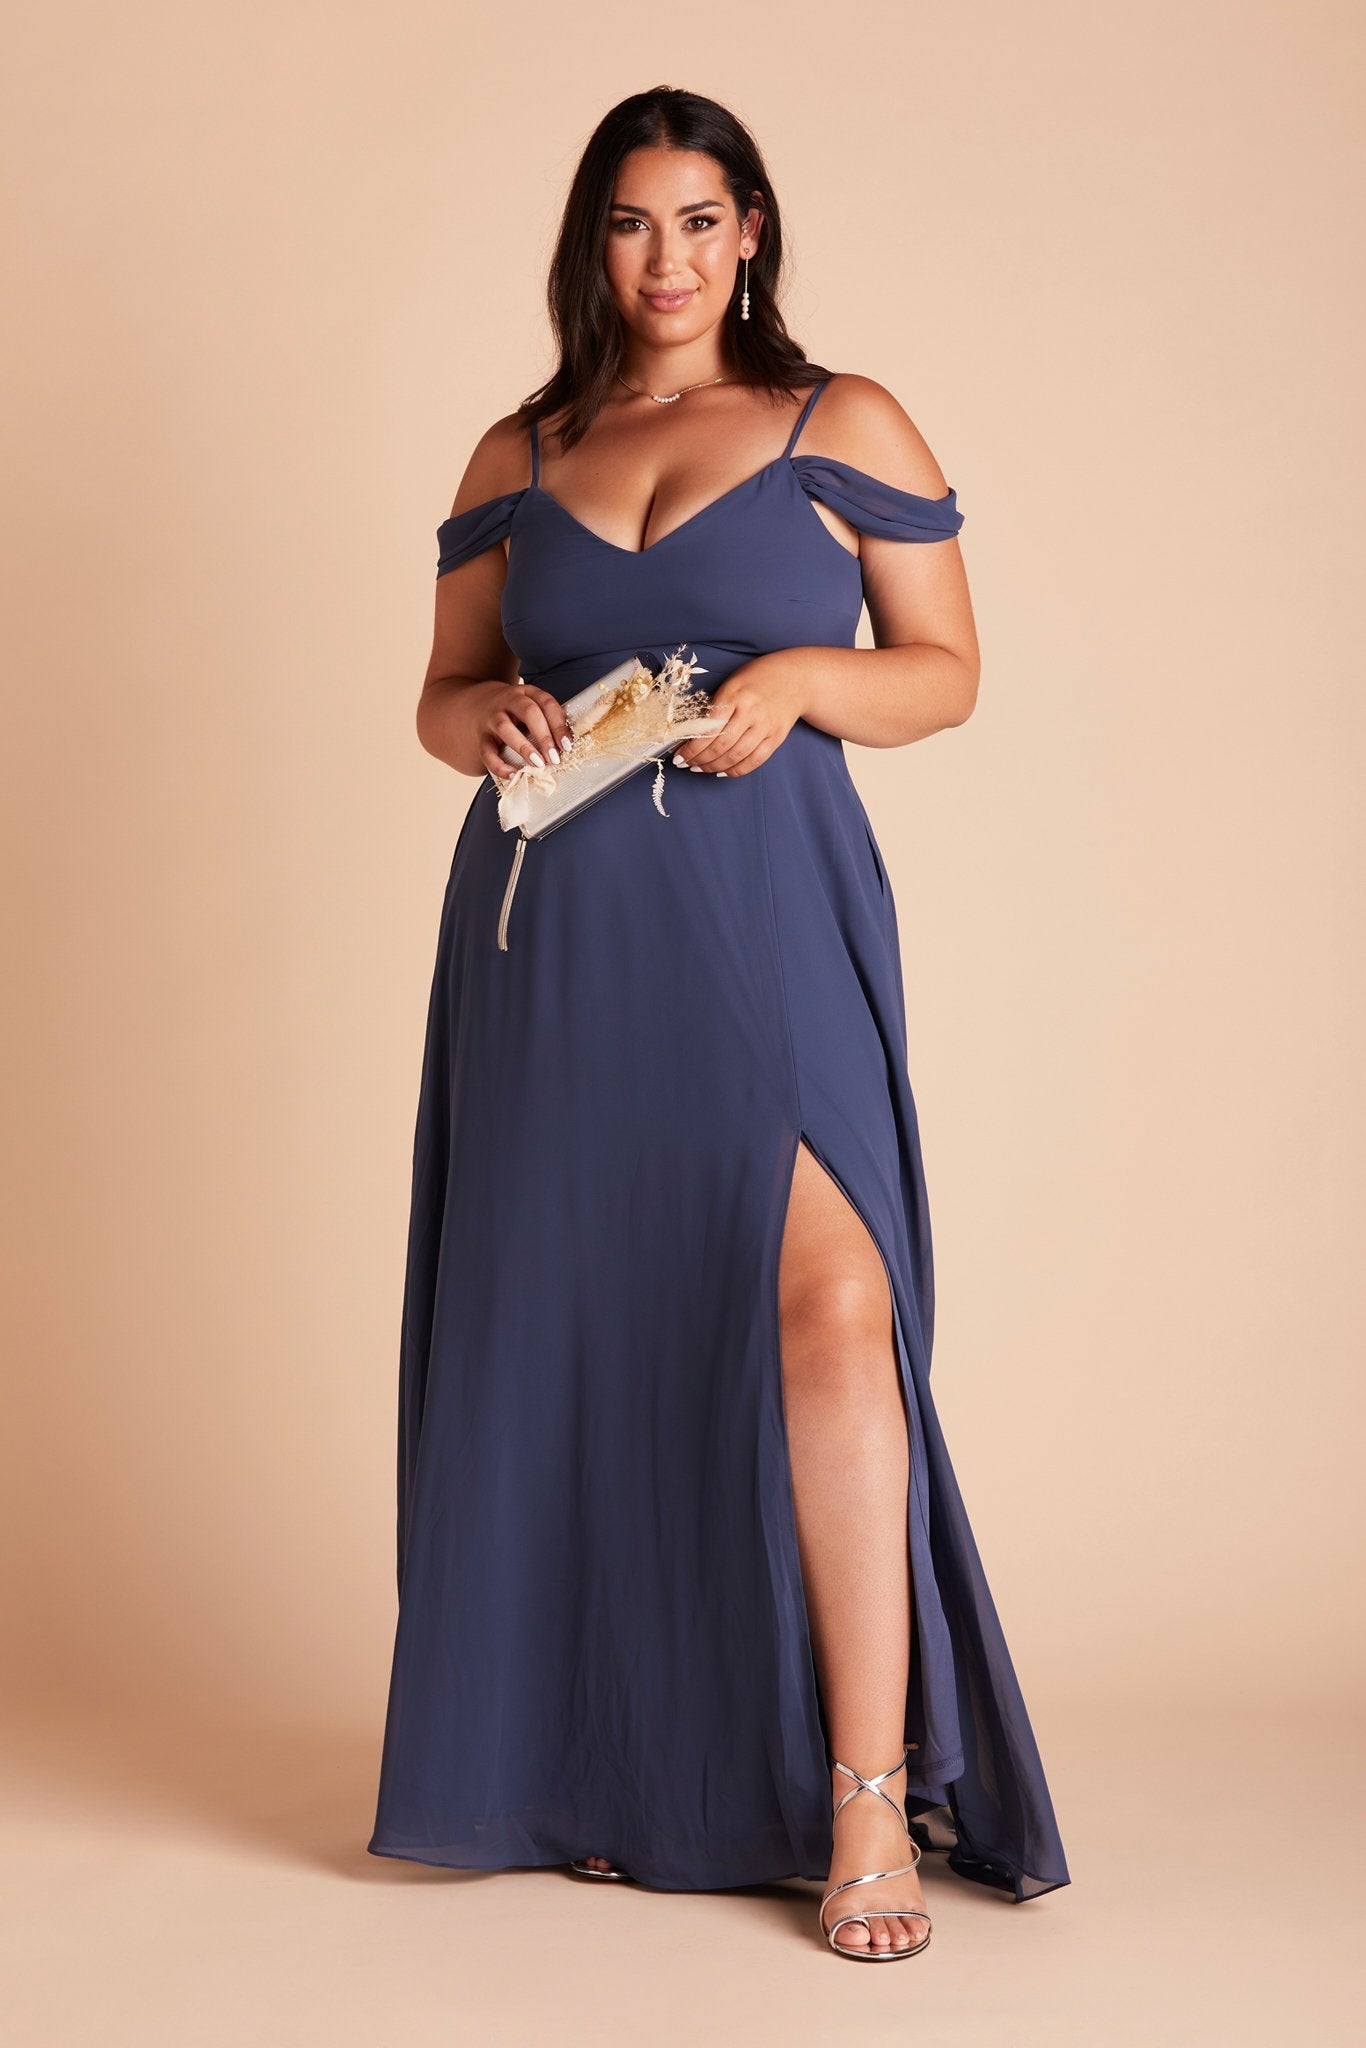 Devin convertible plus size bridesmaids dress with slit in slate blue chiffon by Birdy Grey, front view